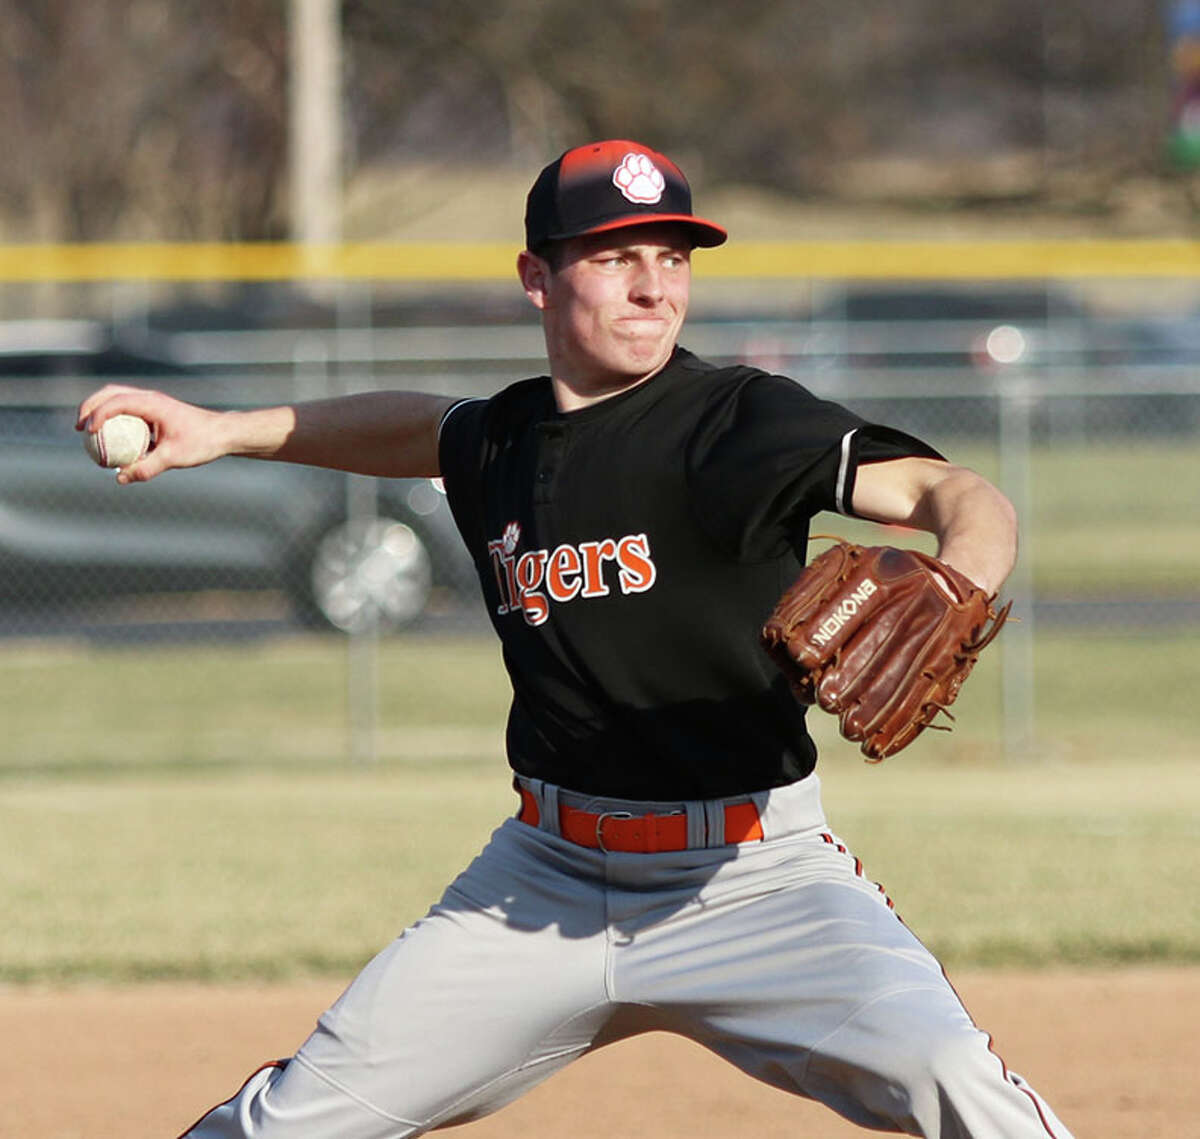 Greenfield's Brady Pembrook, shown pitching earlier this season at Roxana, worked a short shutout Thursday in the unbeaten Tigers' three-inning rout of North Greene in White Hall.